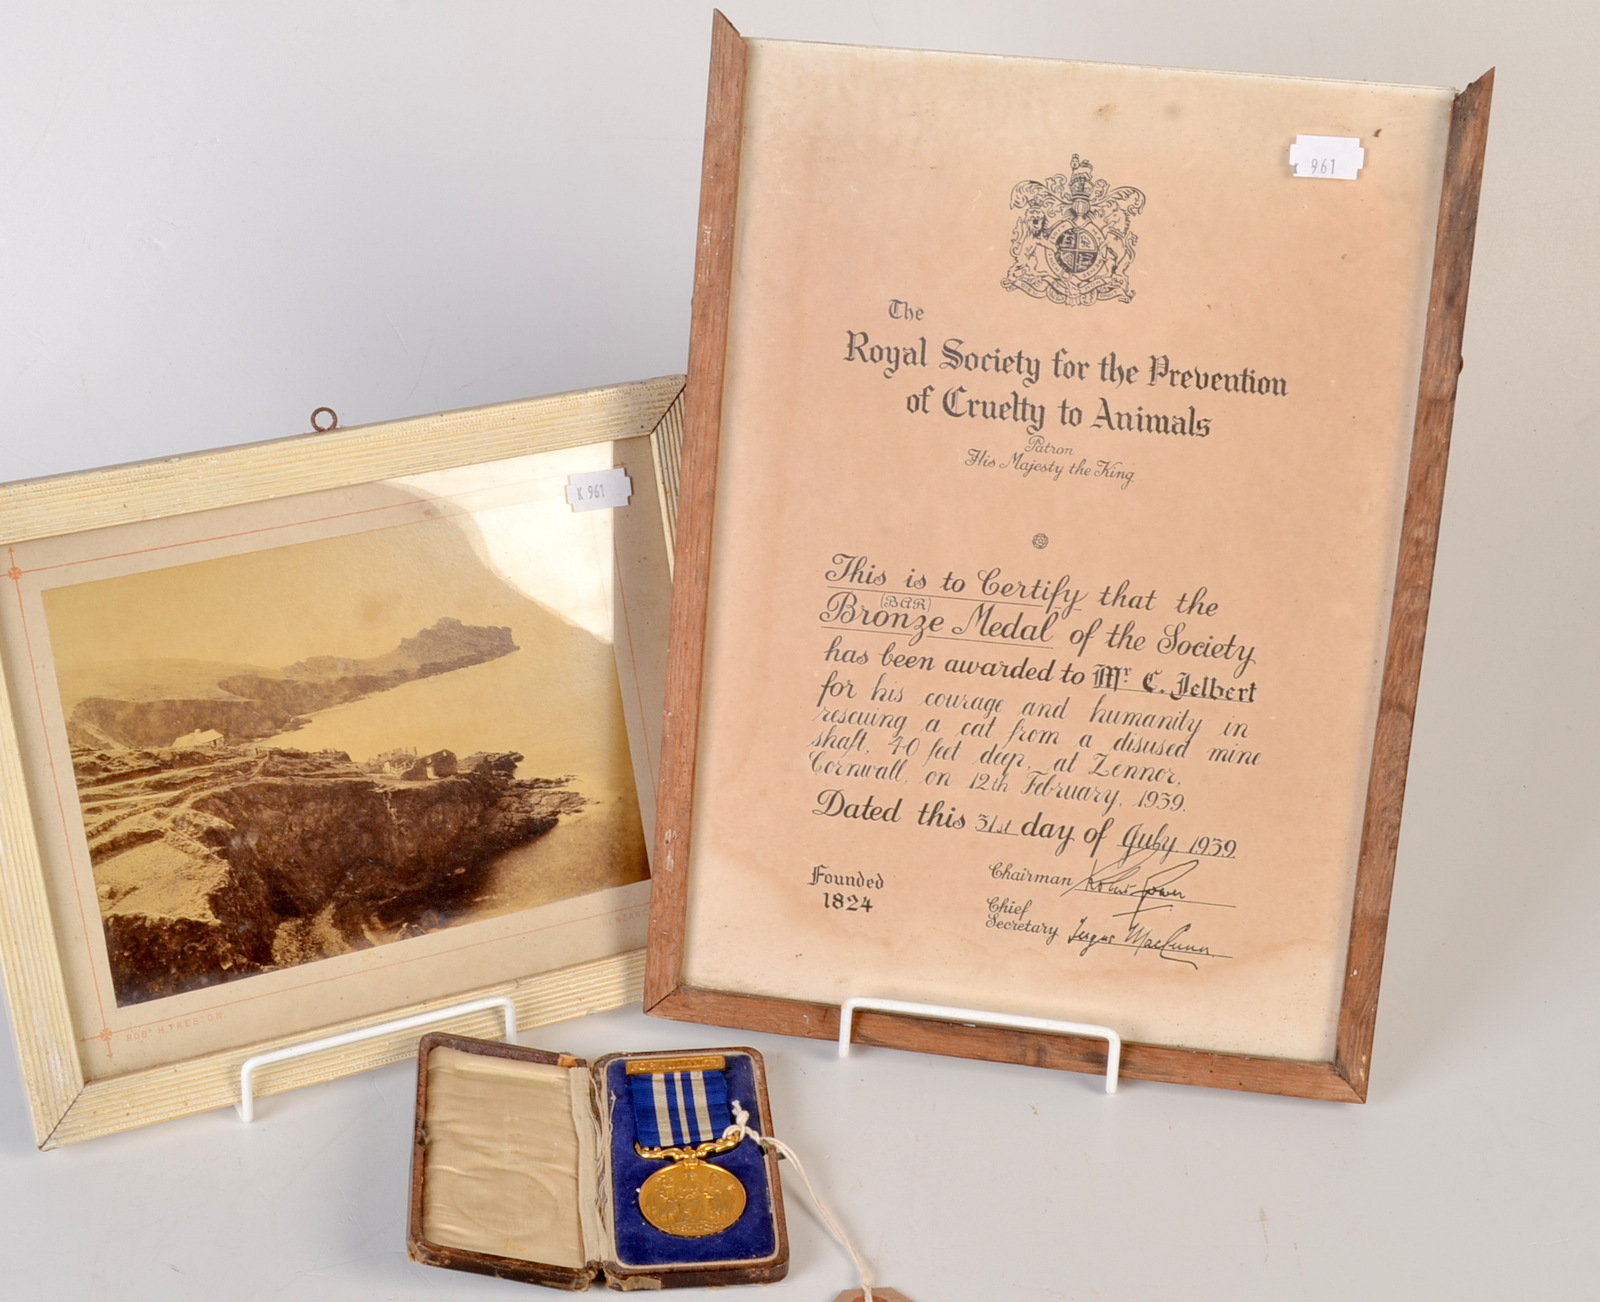 An R.S.P.C.A. bronze medal with its brooch bar and fitted case presented to Mr.C.